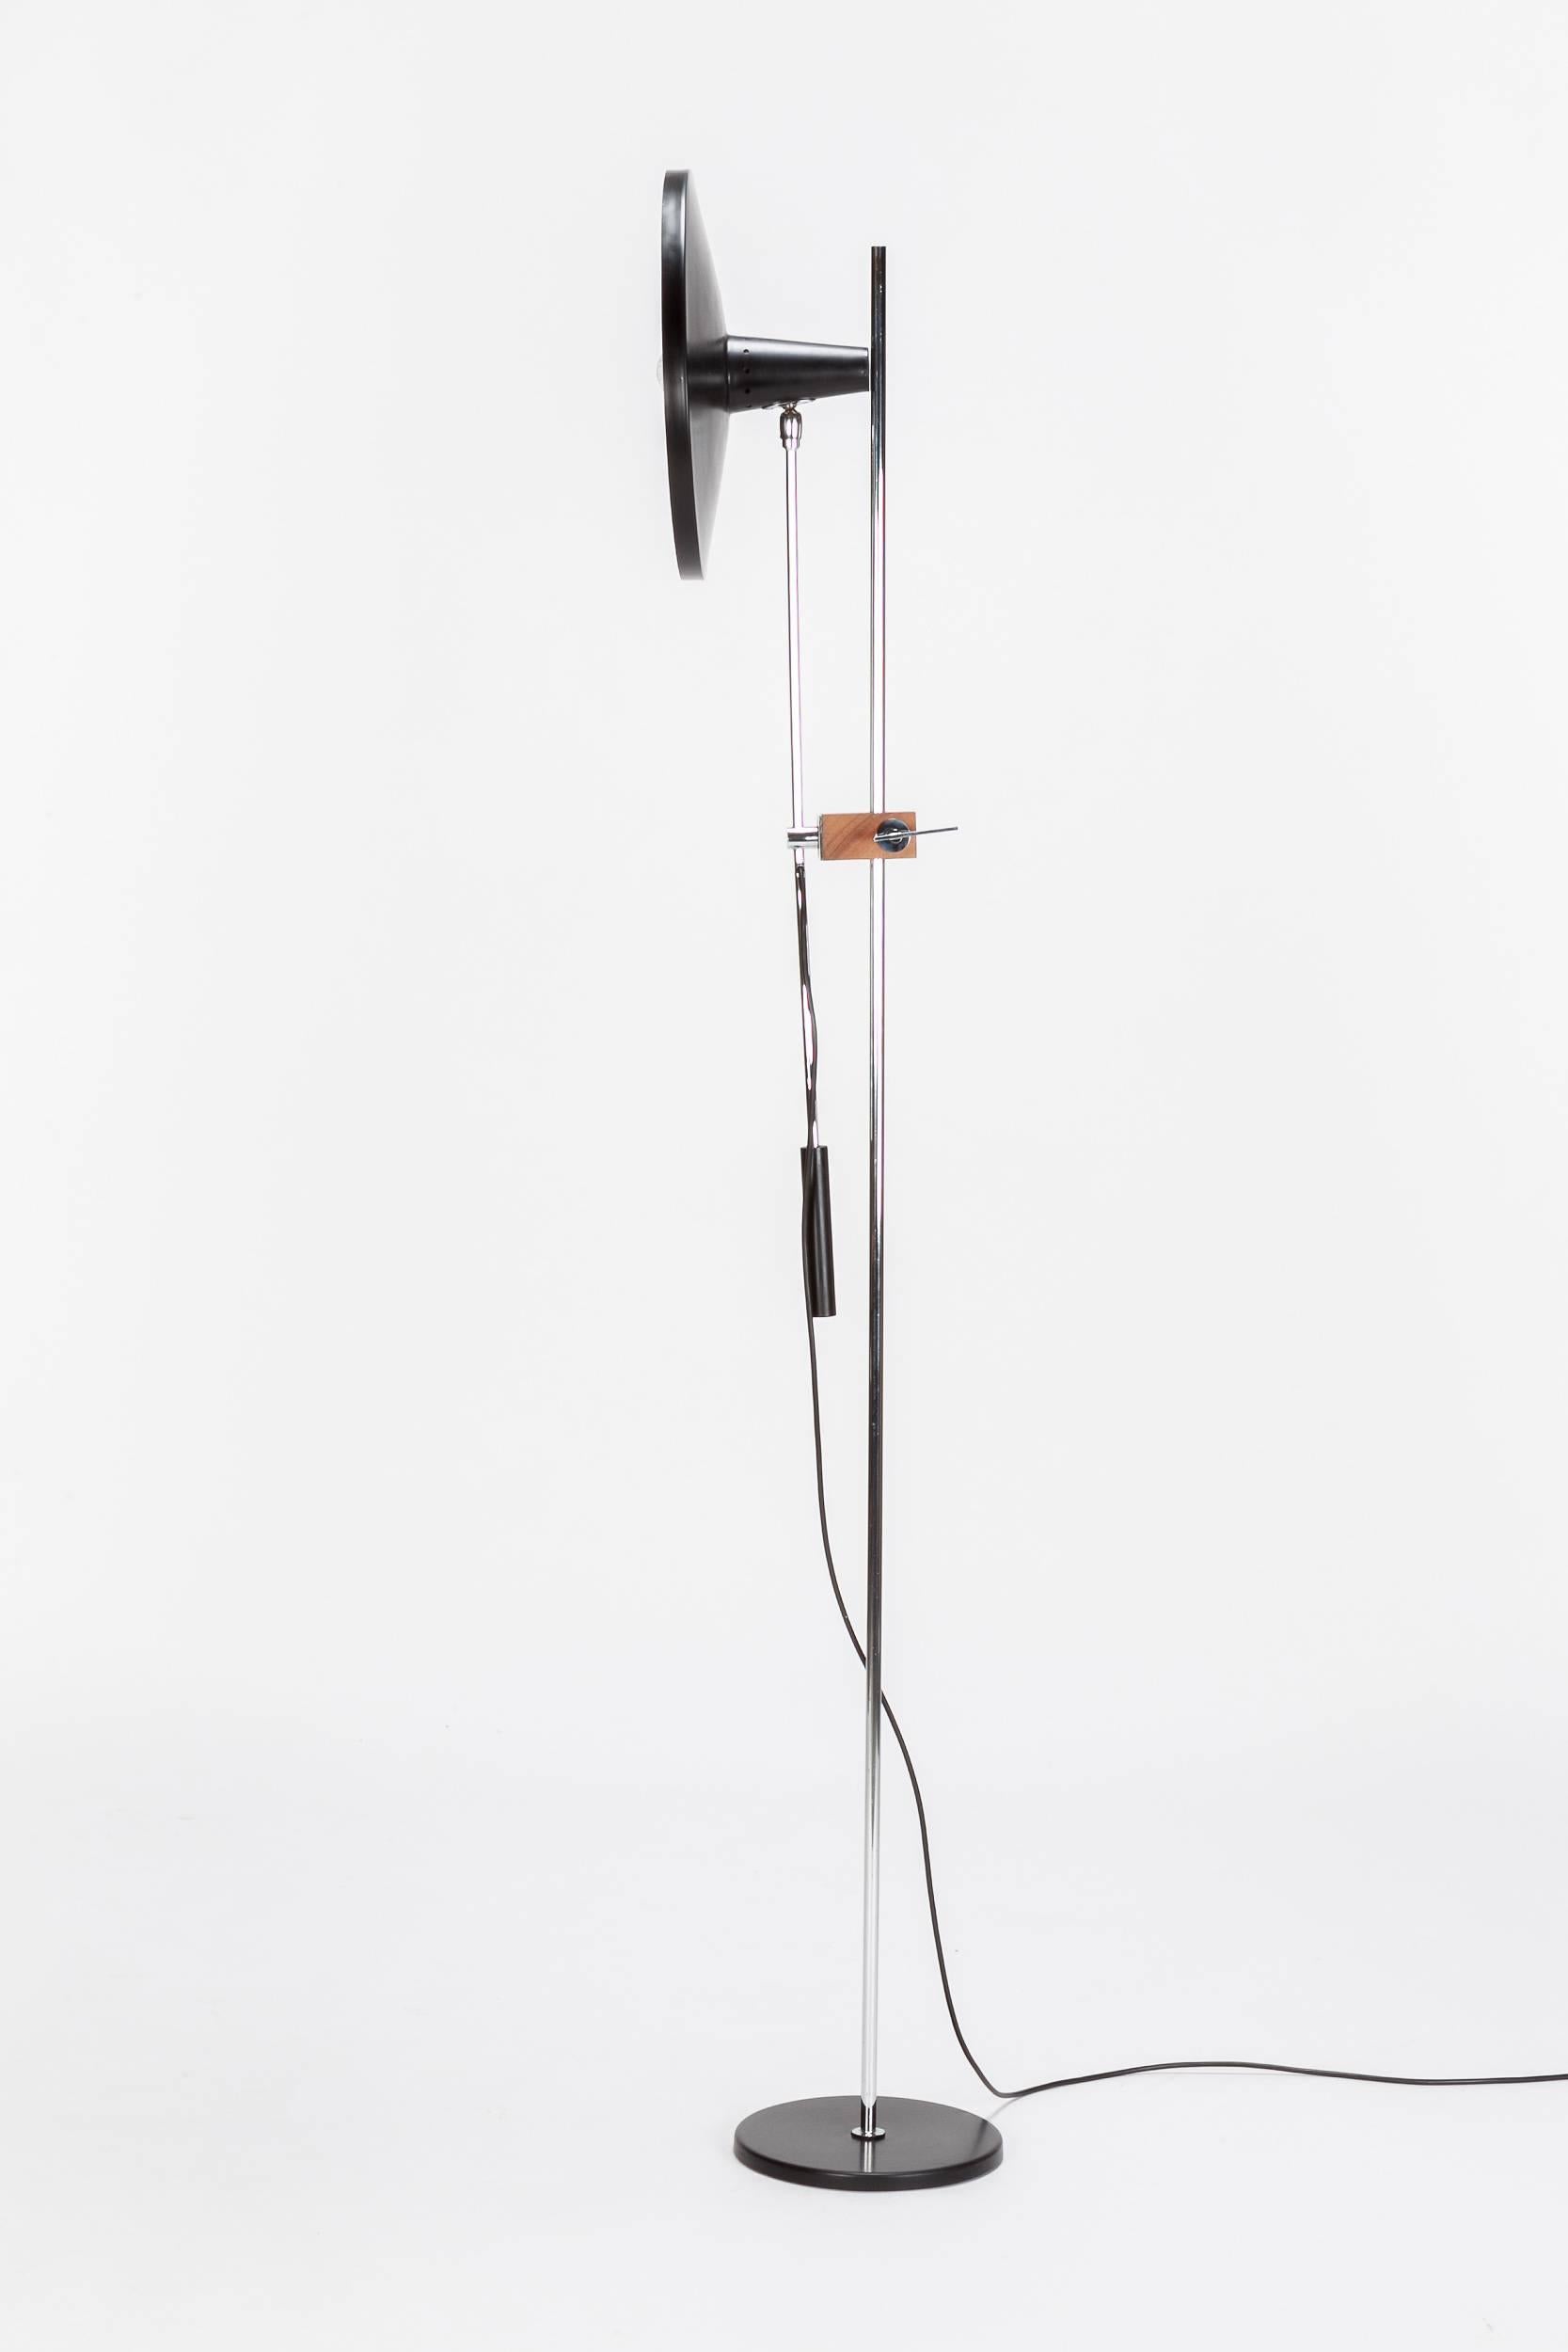 Mid-20th Century Swiss Floor Lamp Attributed to Rico & Rosemarie Baltensweiler 1960s